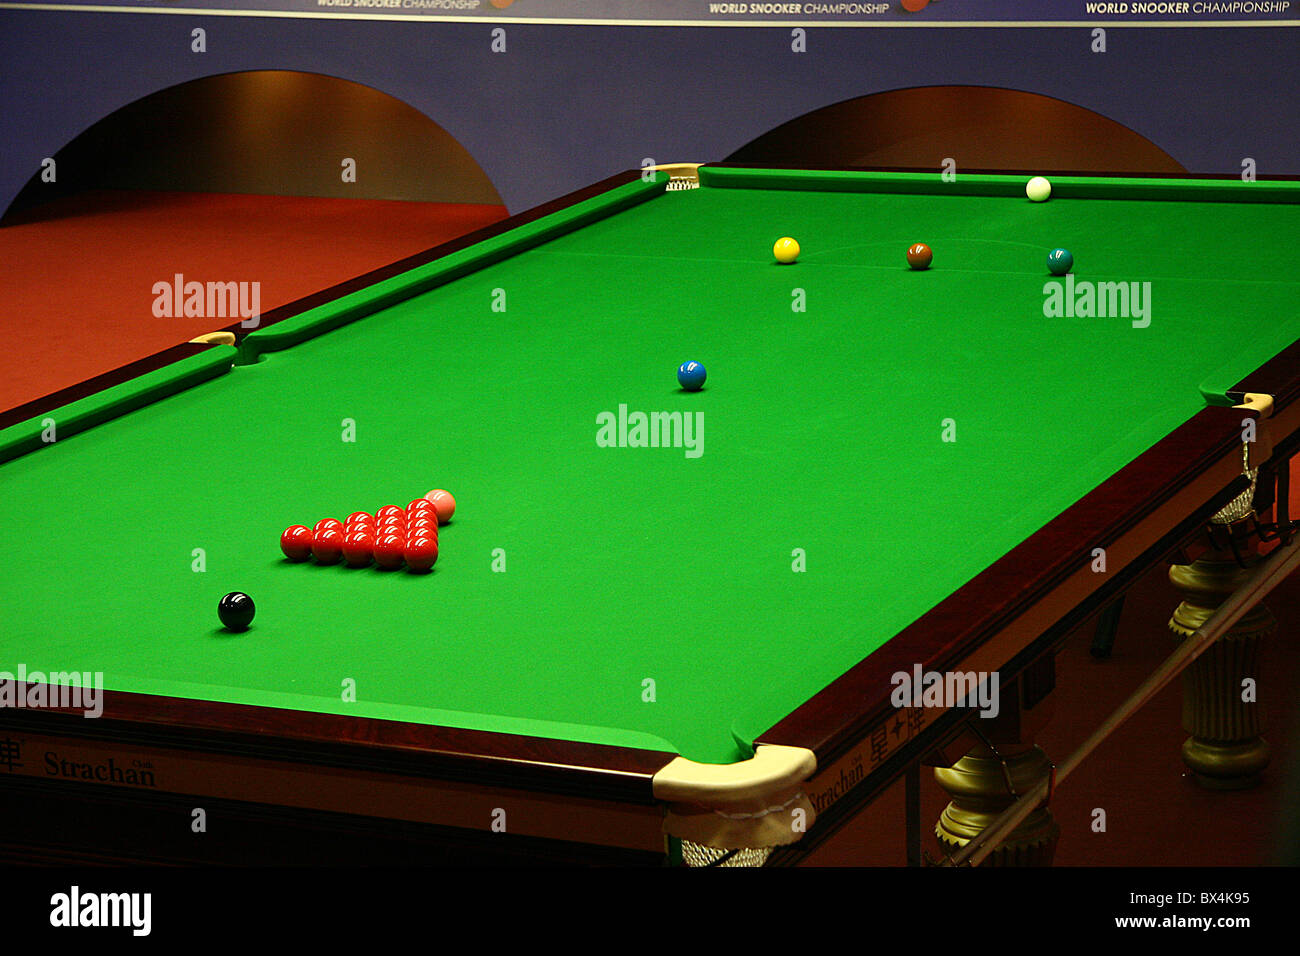 Snooker Table with balls at World Snooker Championships Stock Photo